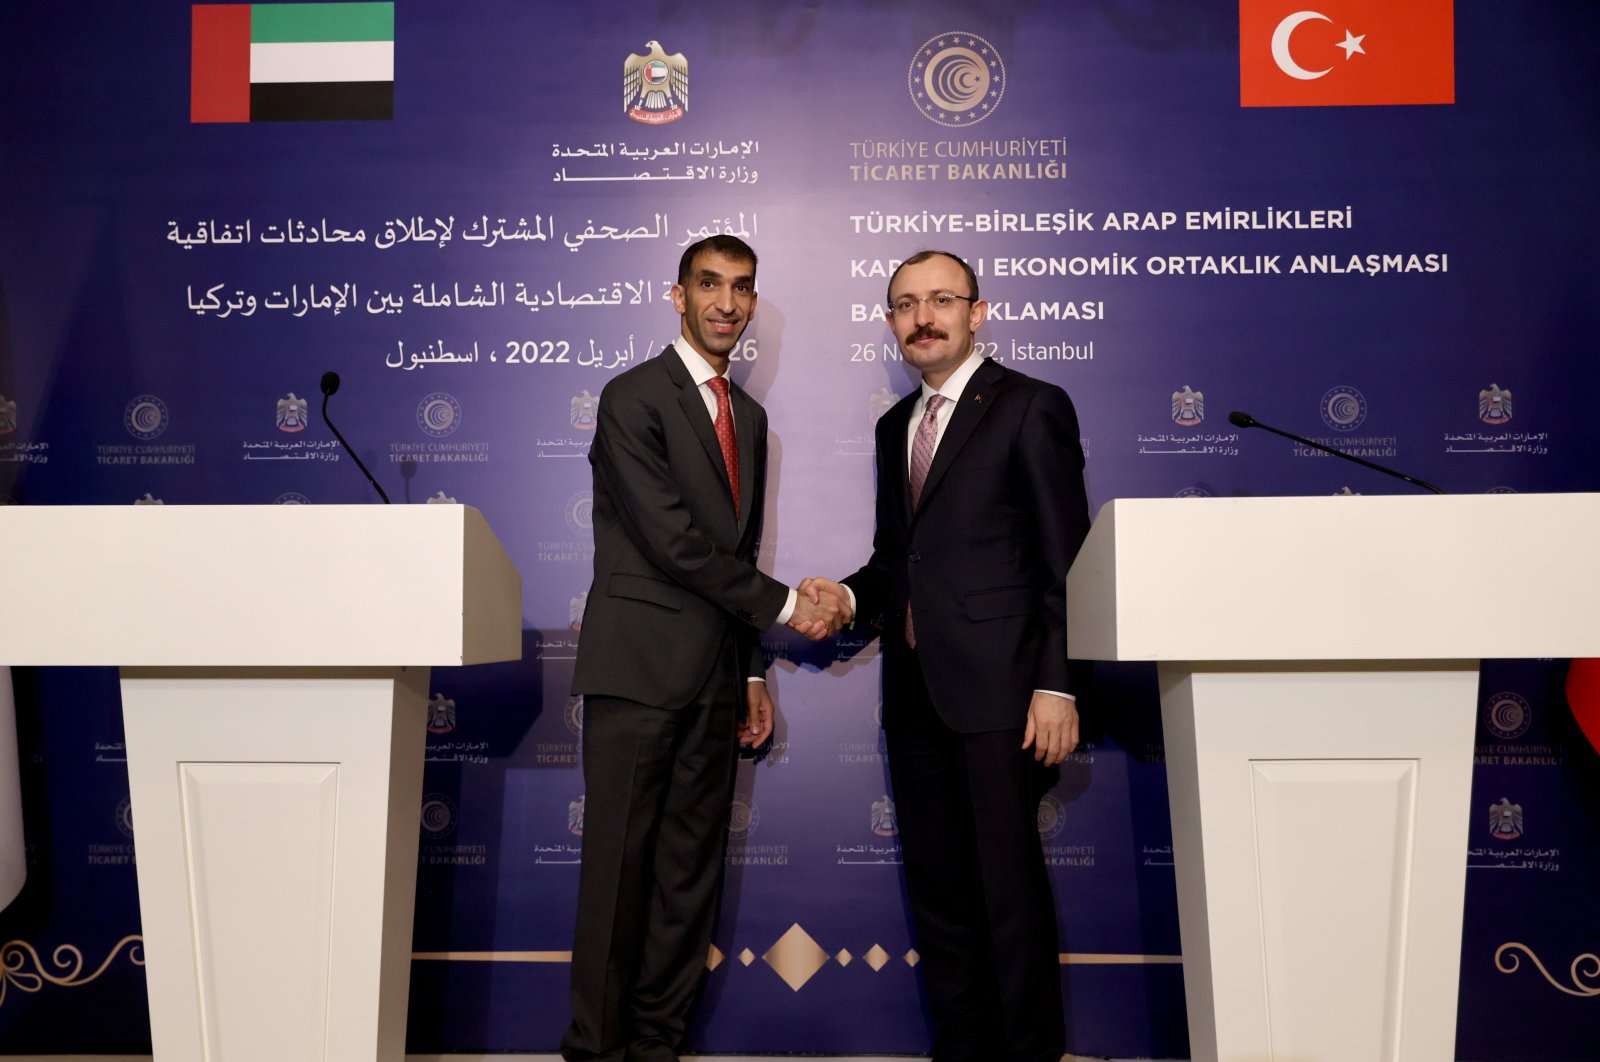 Trade Minister Mehmet Muş (R) and Emirati Minister of State for Foreign Trade Thani al-Zeyoudi shake hands after a joint press conference in Istanbul, Turkey, April 26, 2022. (AA Photo)